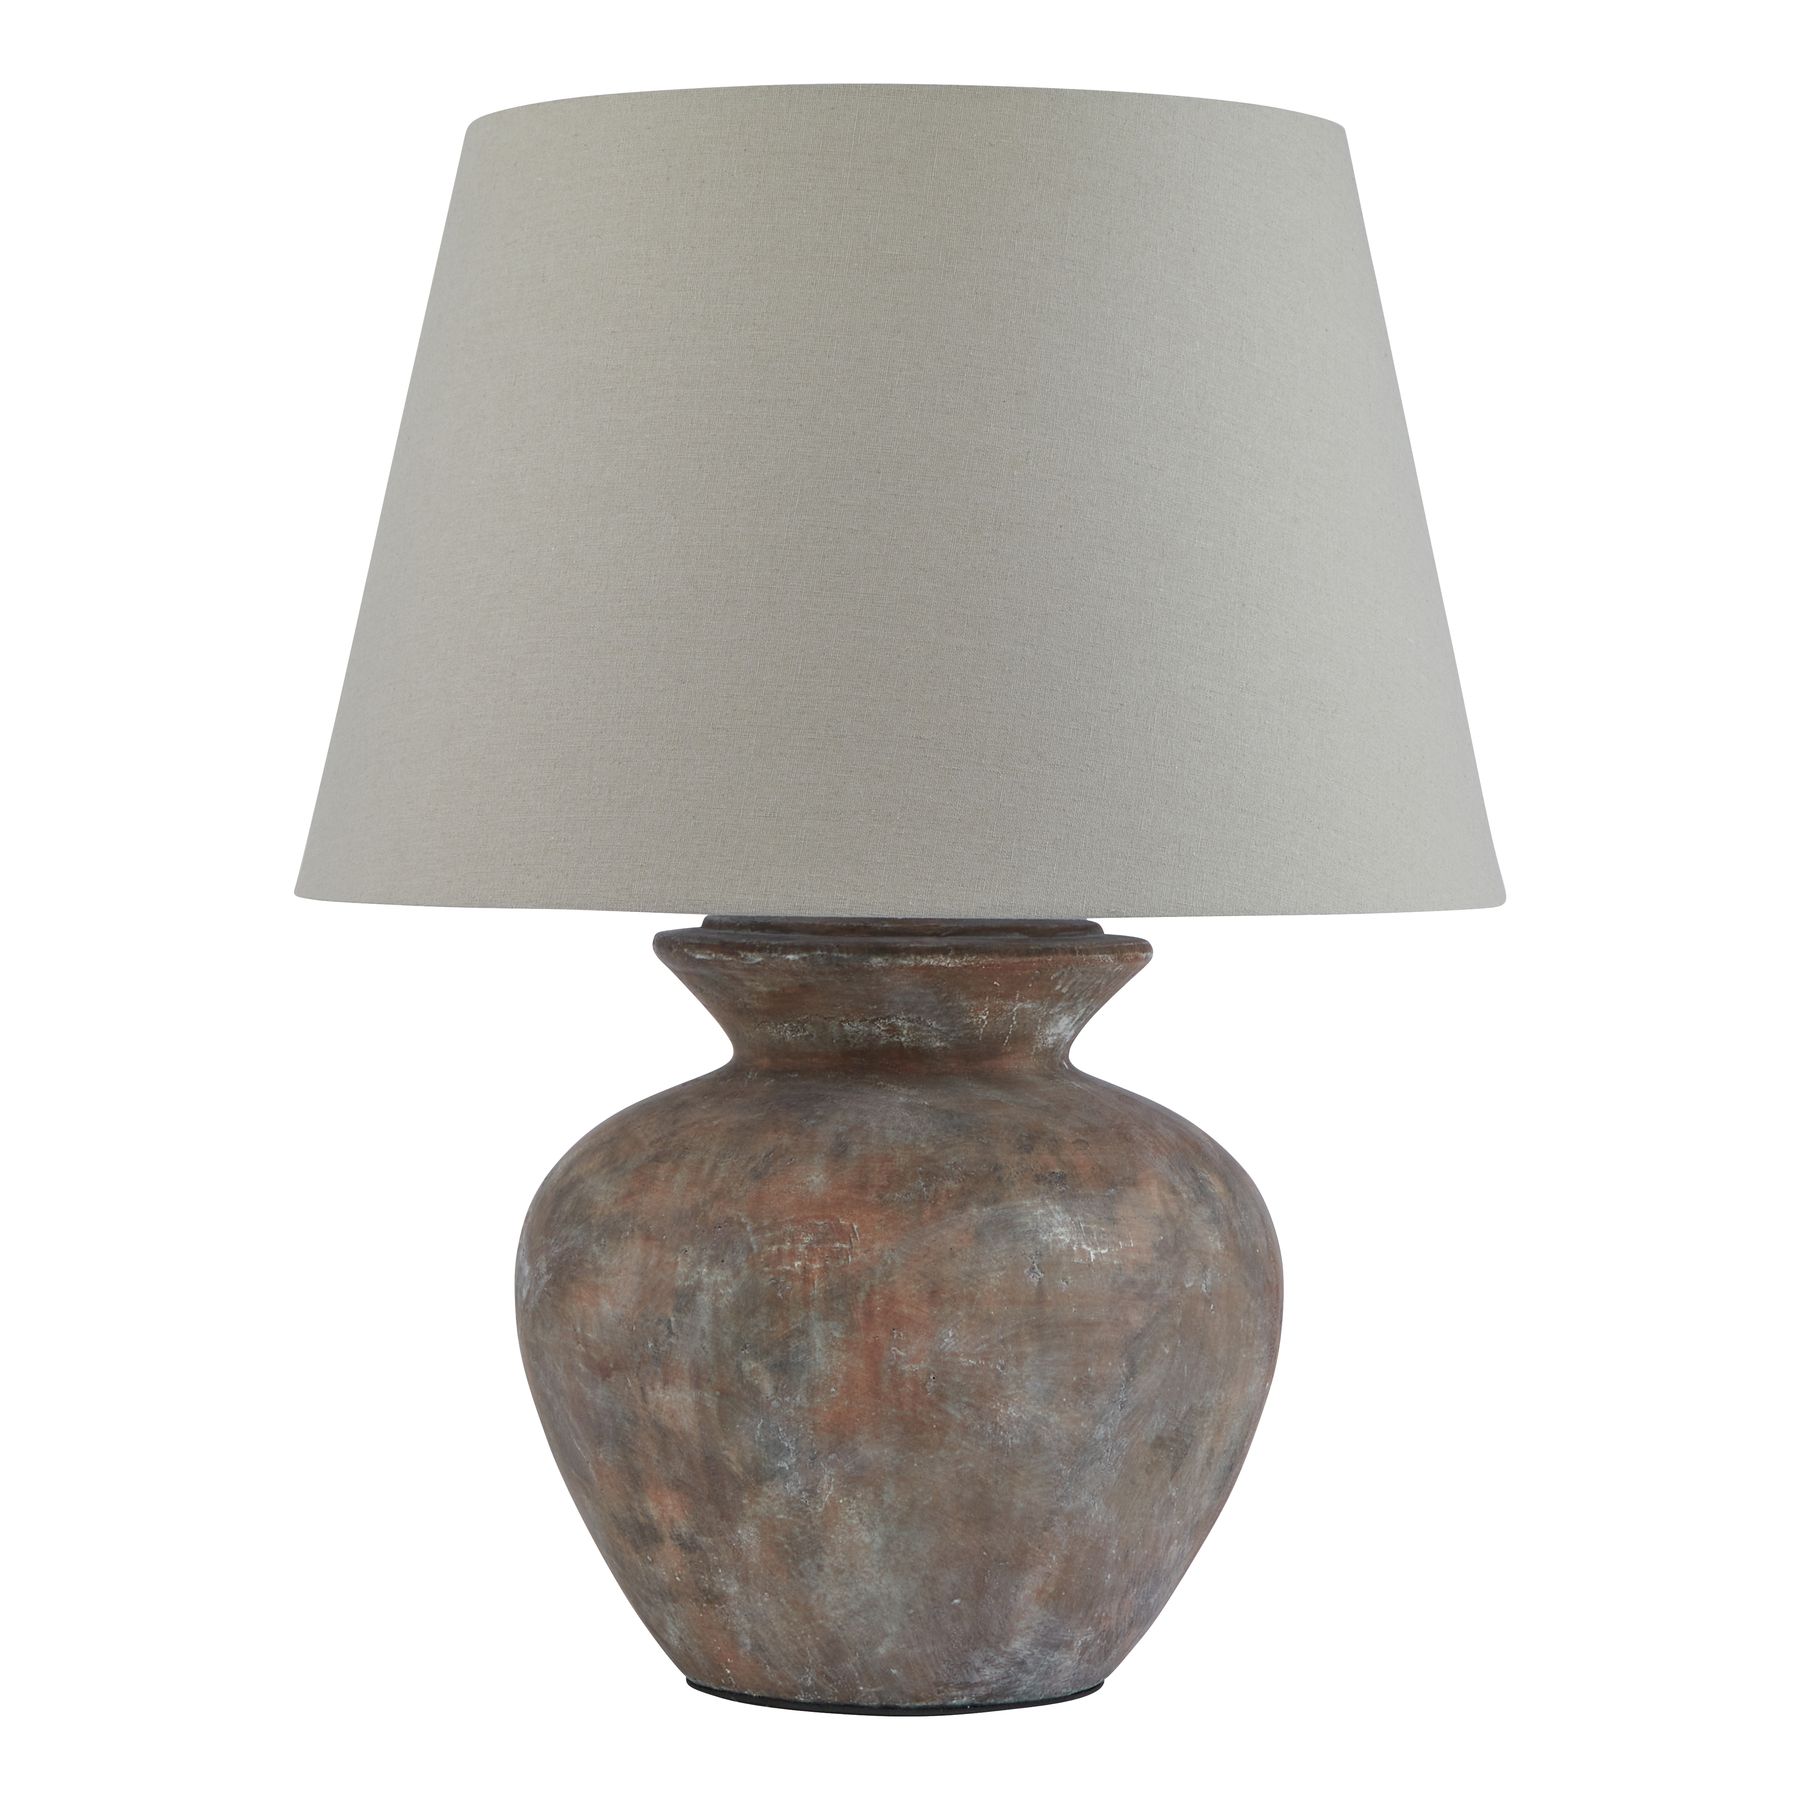 Siena Brown  Round Table Lamp With Linen Shade - Image 1